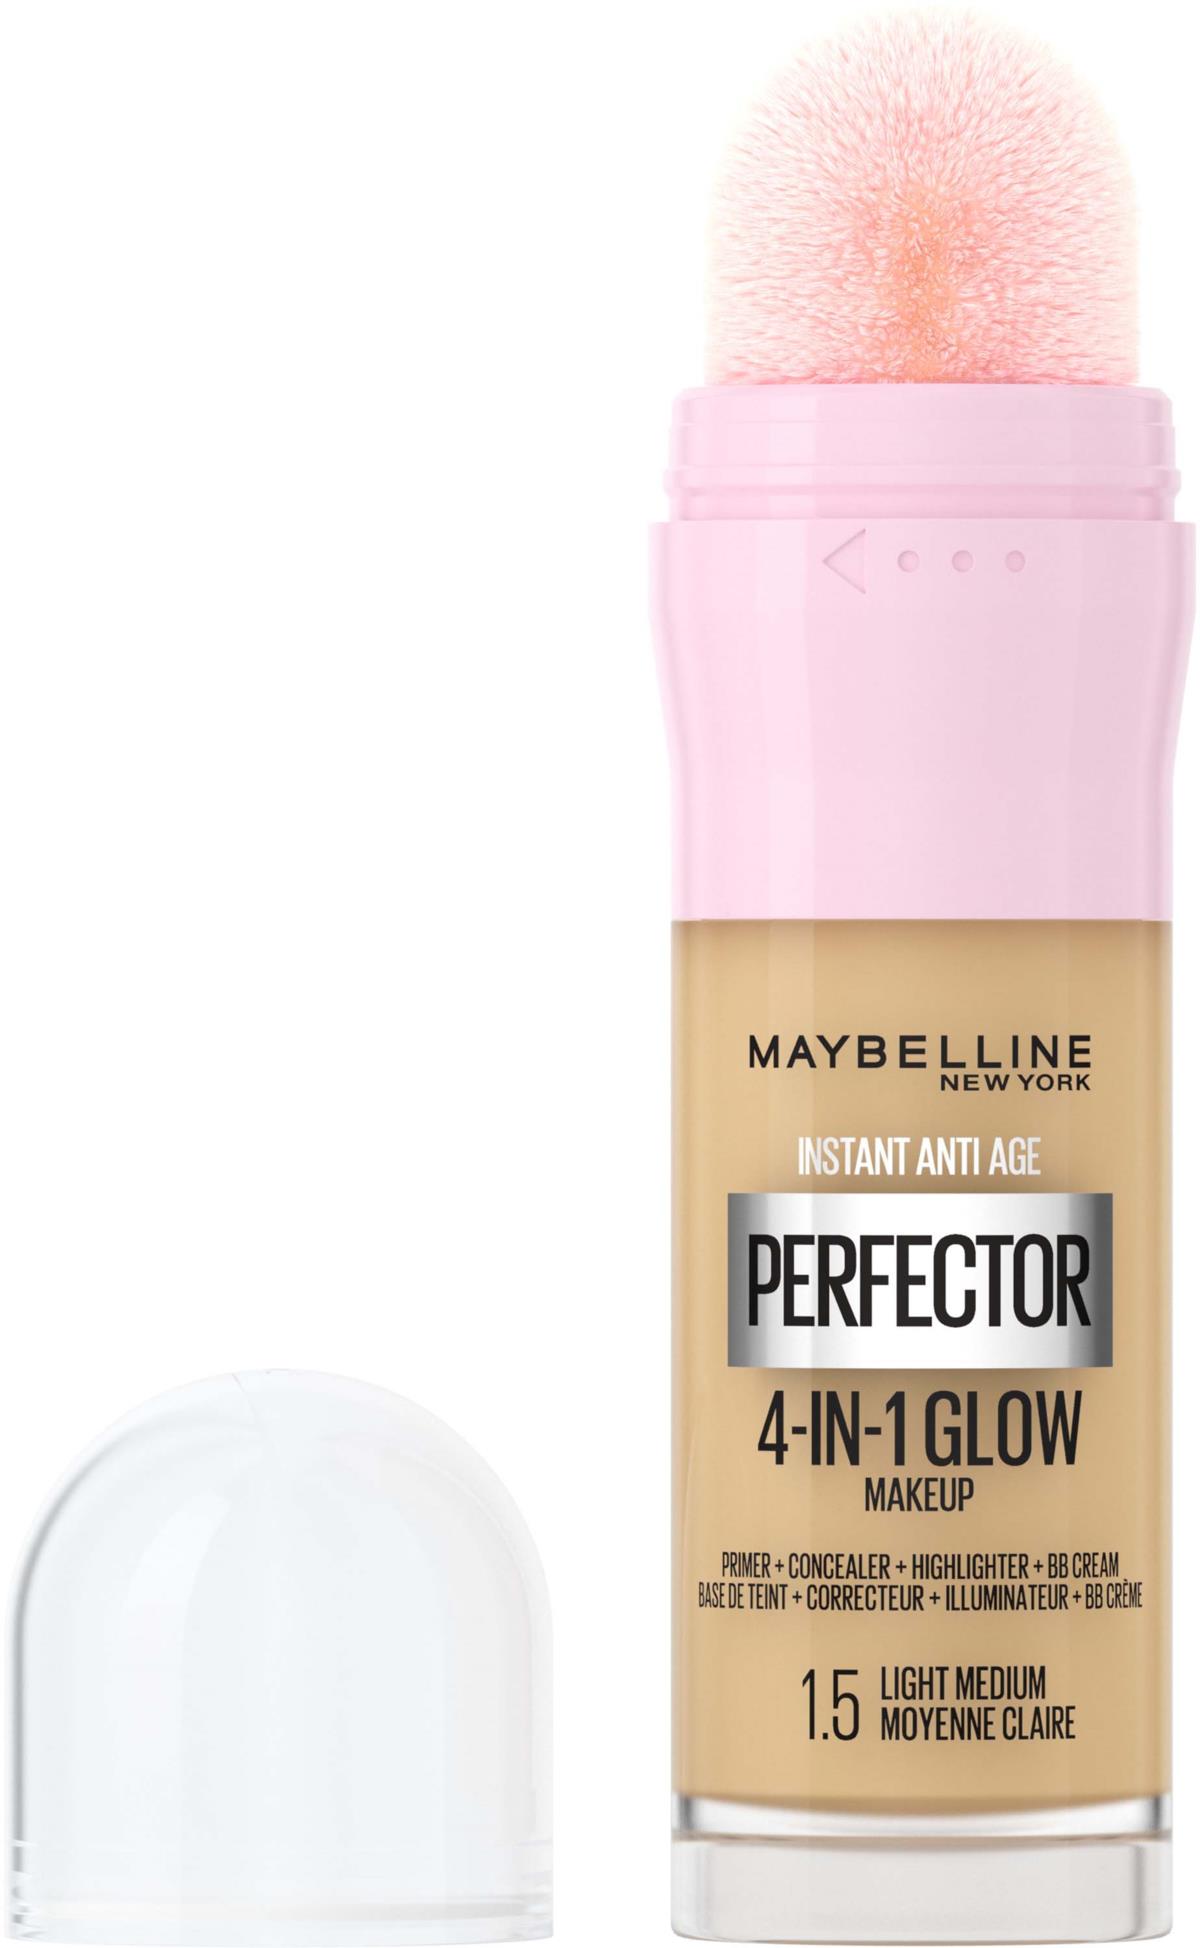 Maybelline New York Instant Anti-Age Perfector 4-in-1 Glow Makeup 1.5 Light Medium